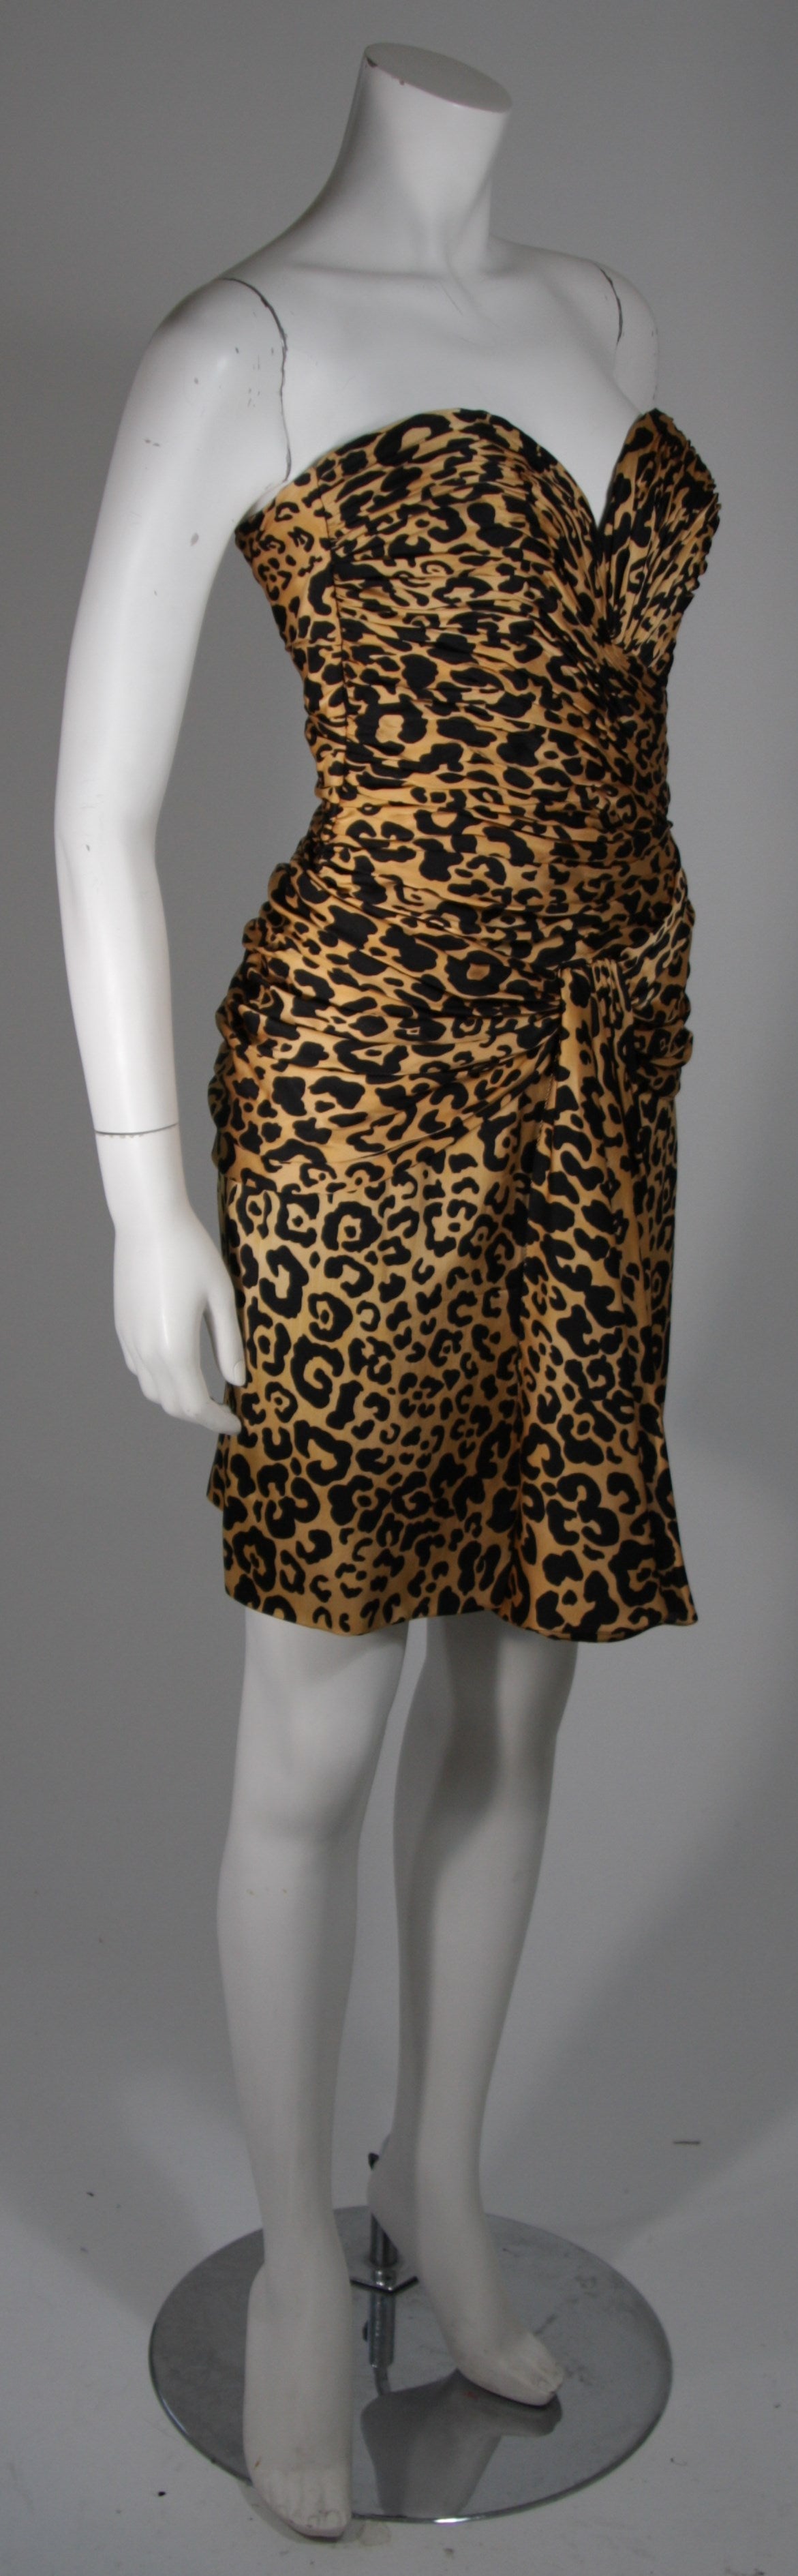 Women's Vicky Tiel Silk Animal Print Bustier Dress with Capelet Size Small